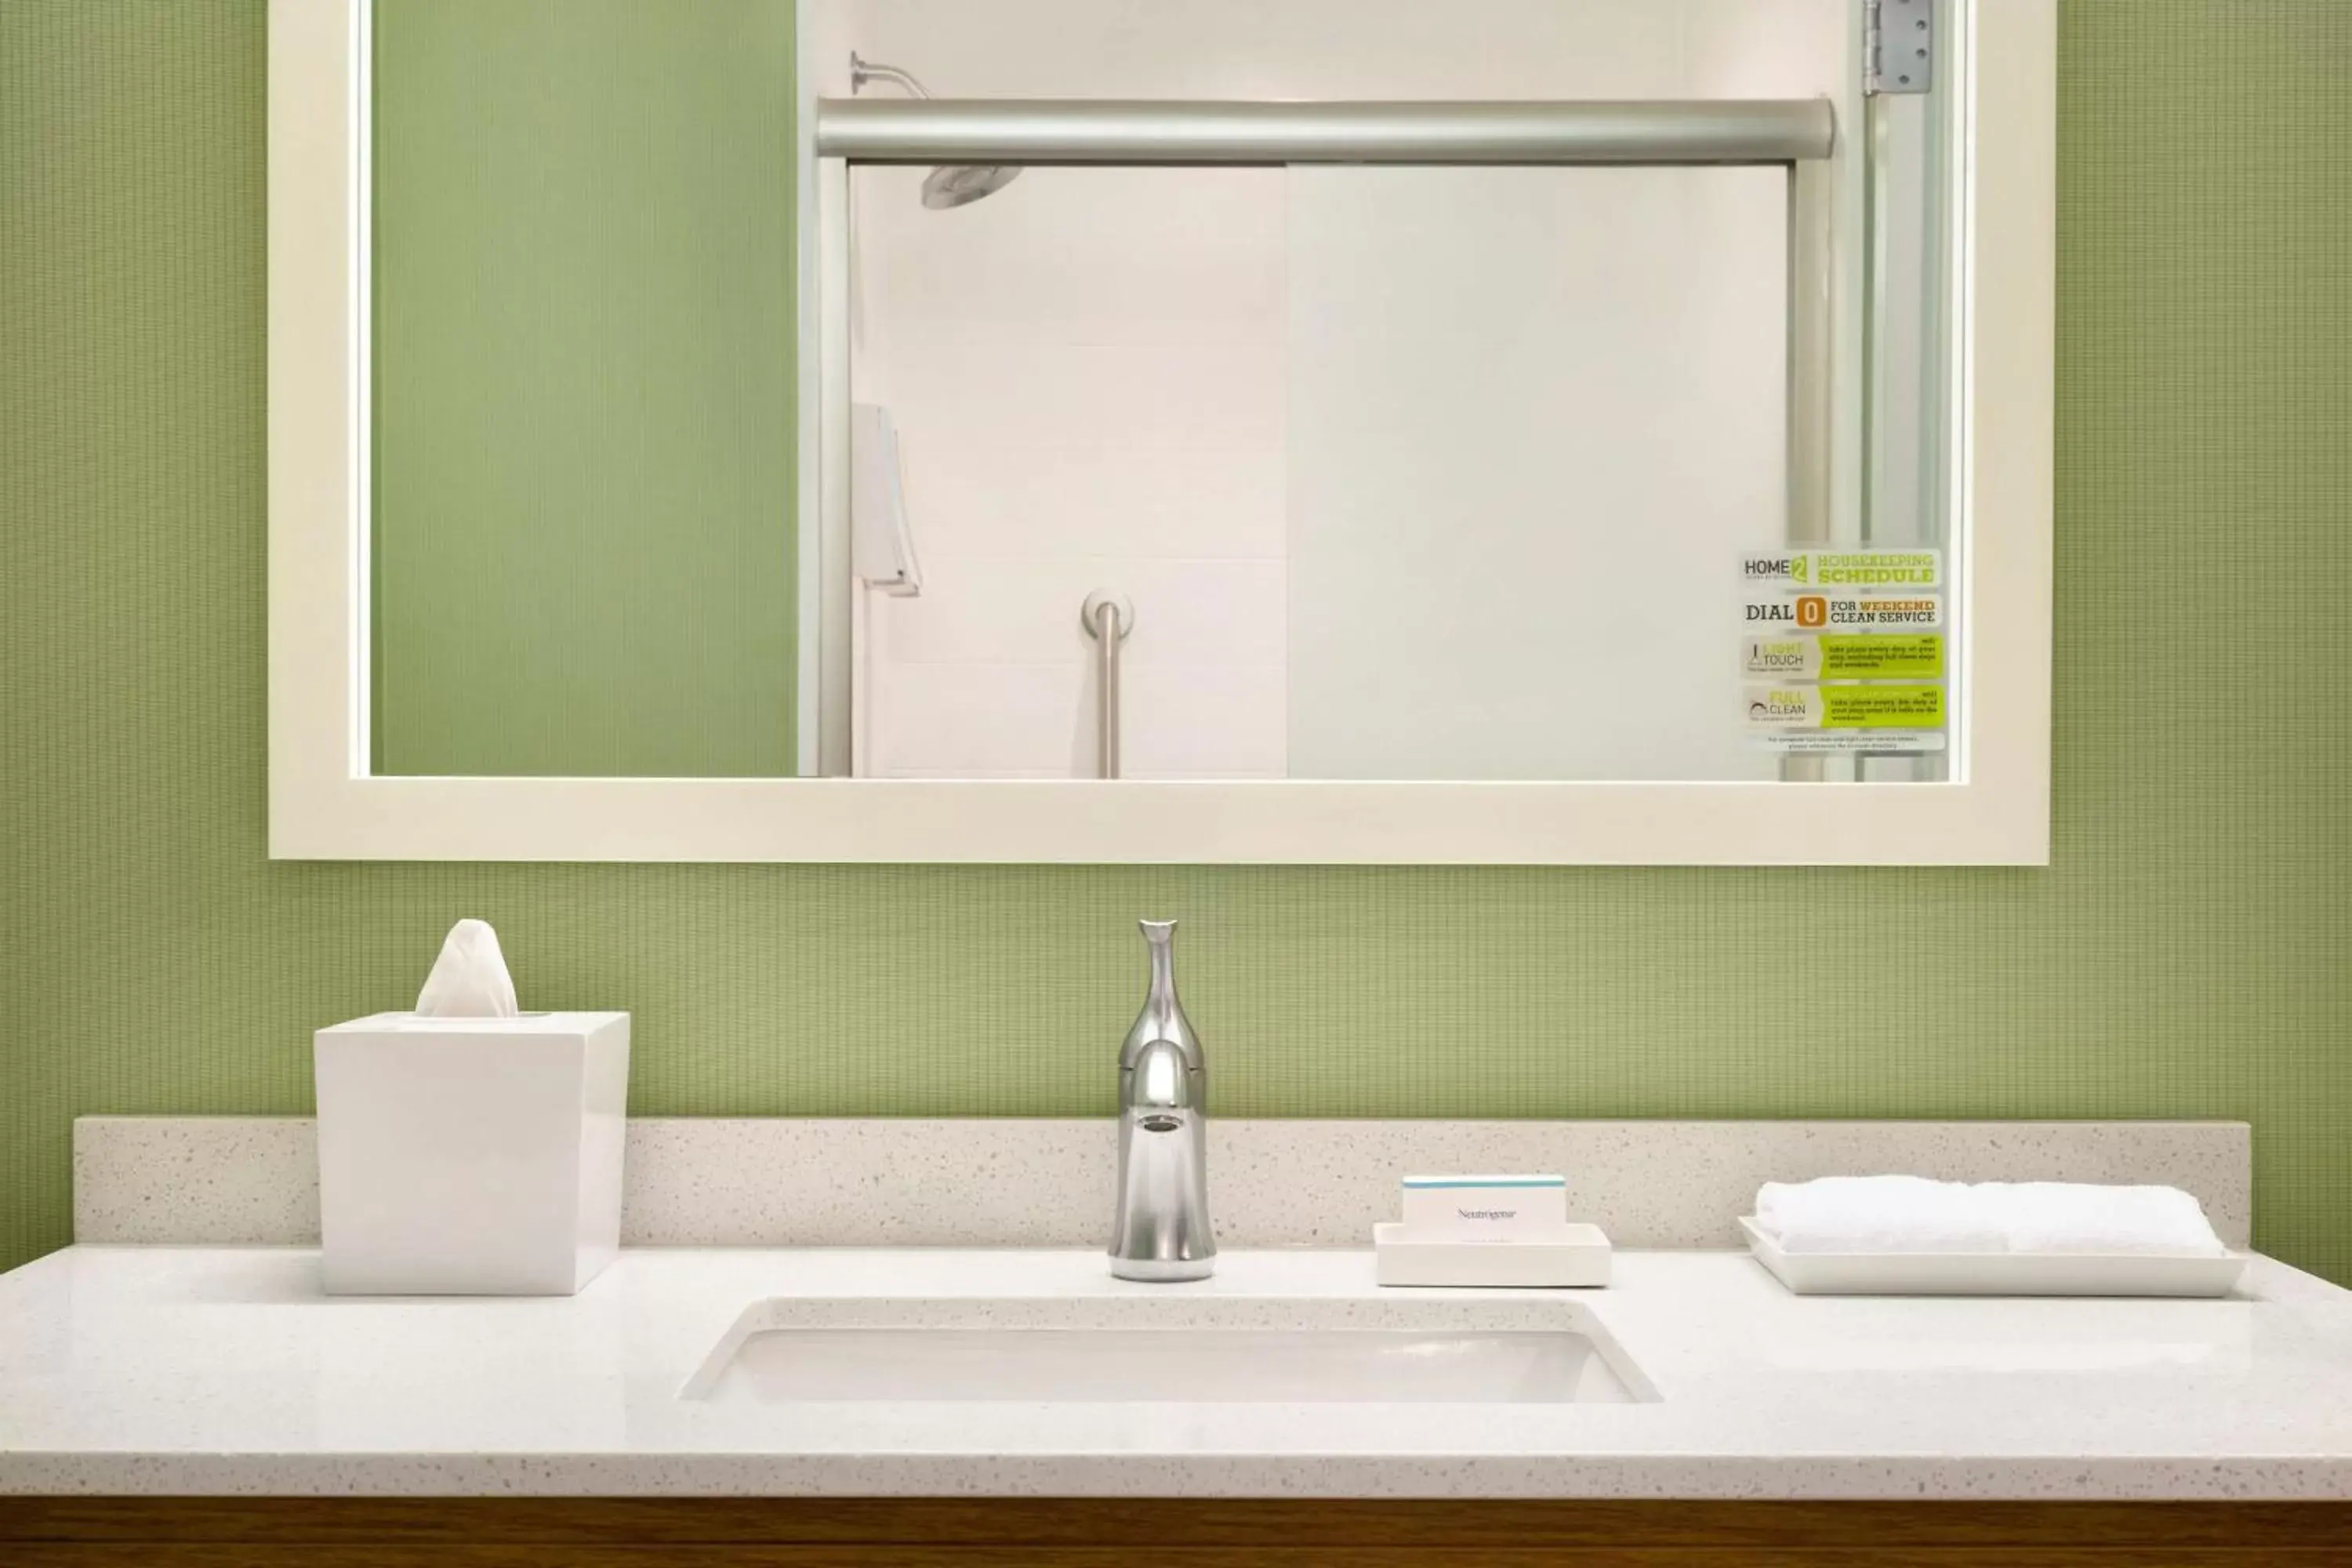 Bathroom in Home2 Suites By Hilton Hasbrouck Heights